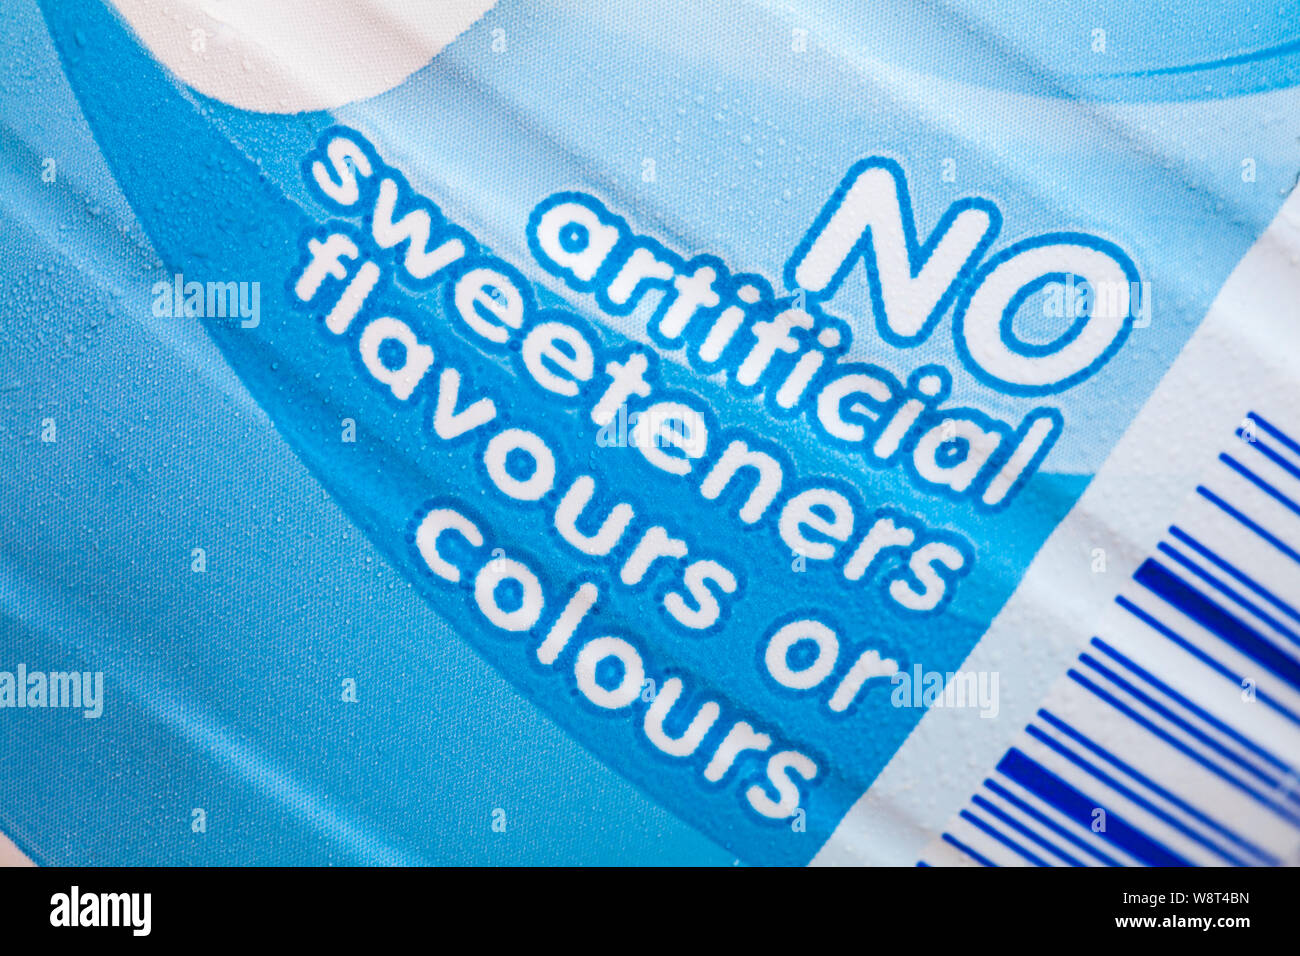 No artificial sweeteners flavours or colours - detail on bottle of vanilla Yazoo milk drink Stock Photo